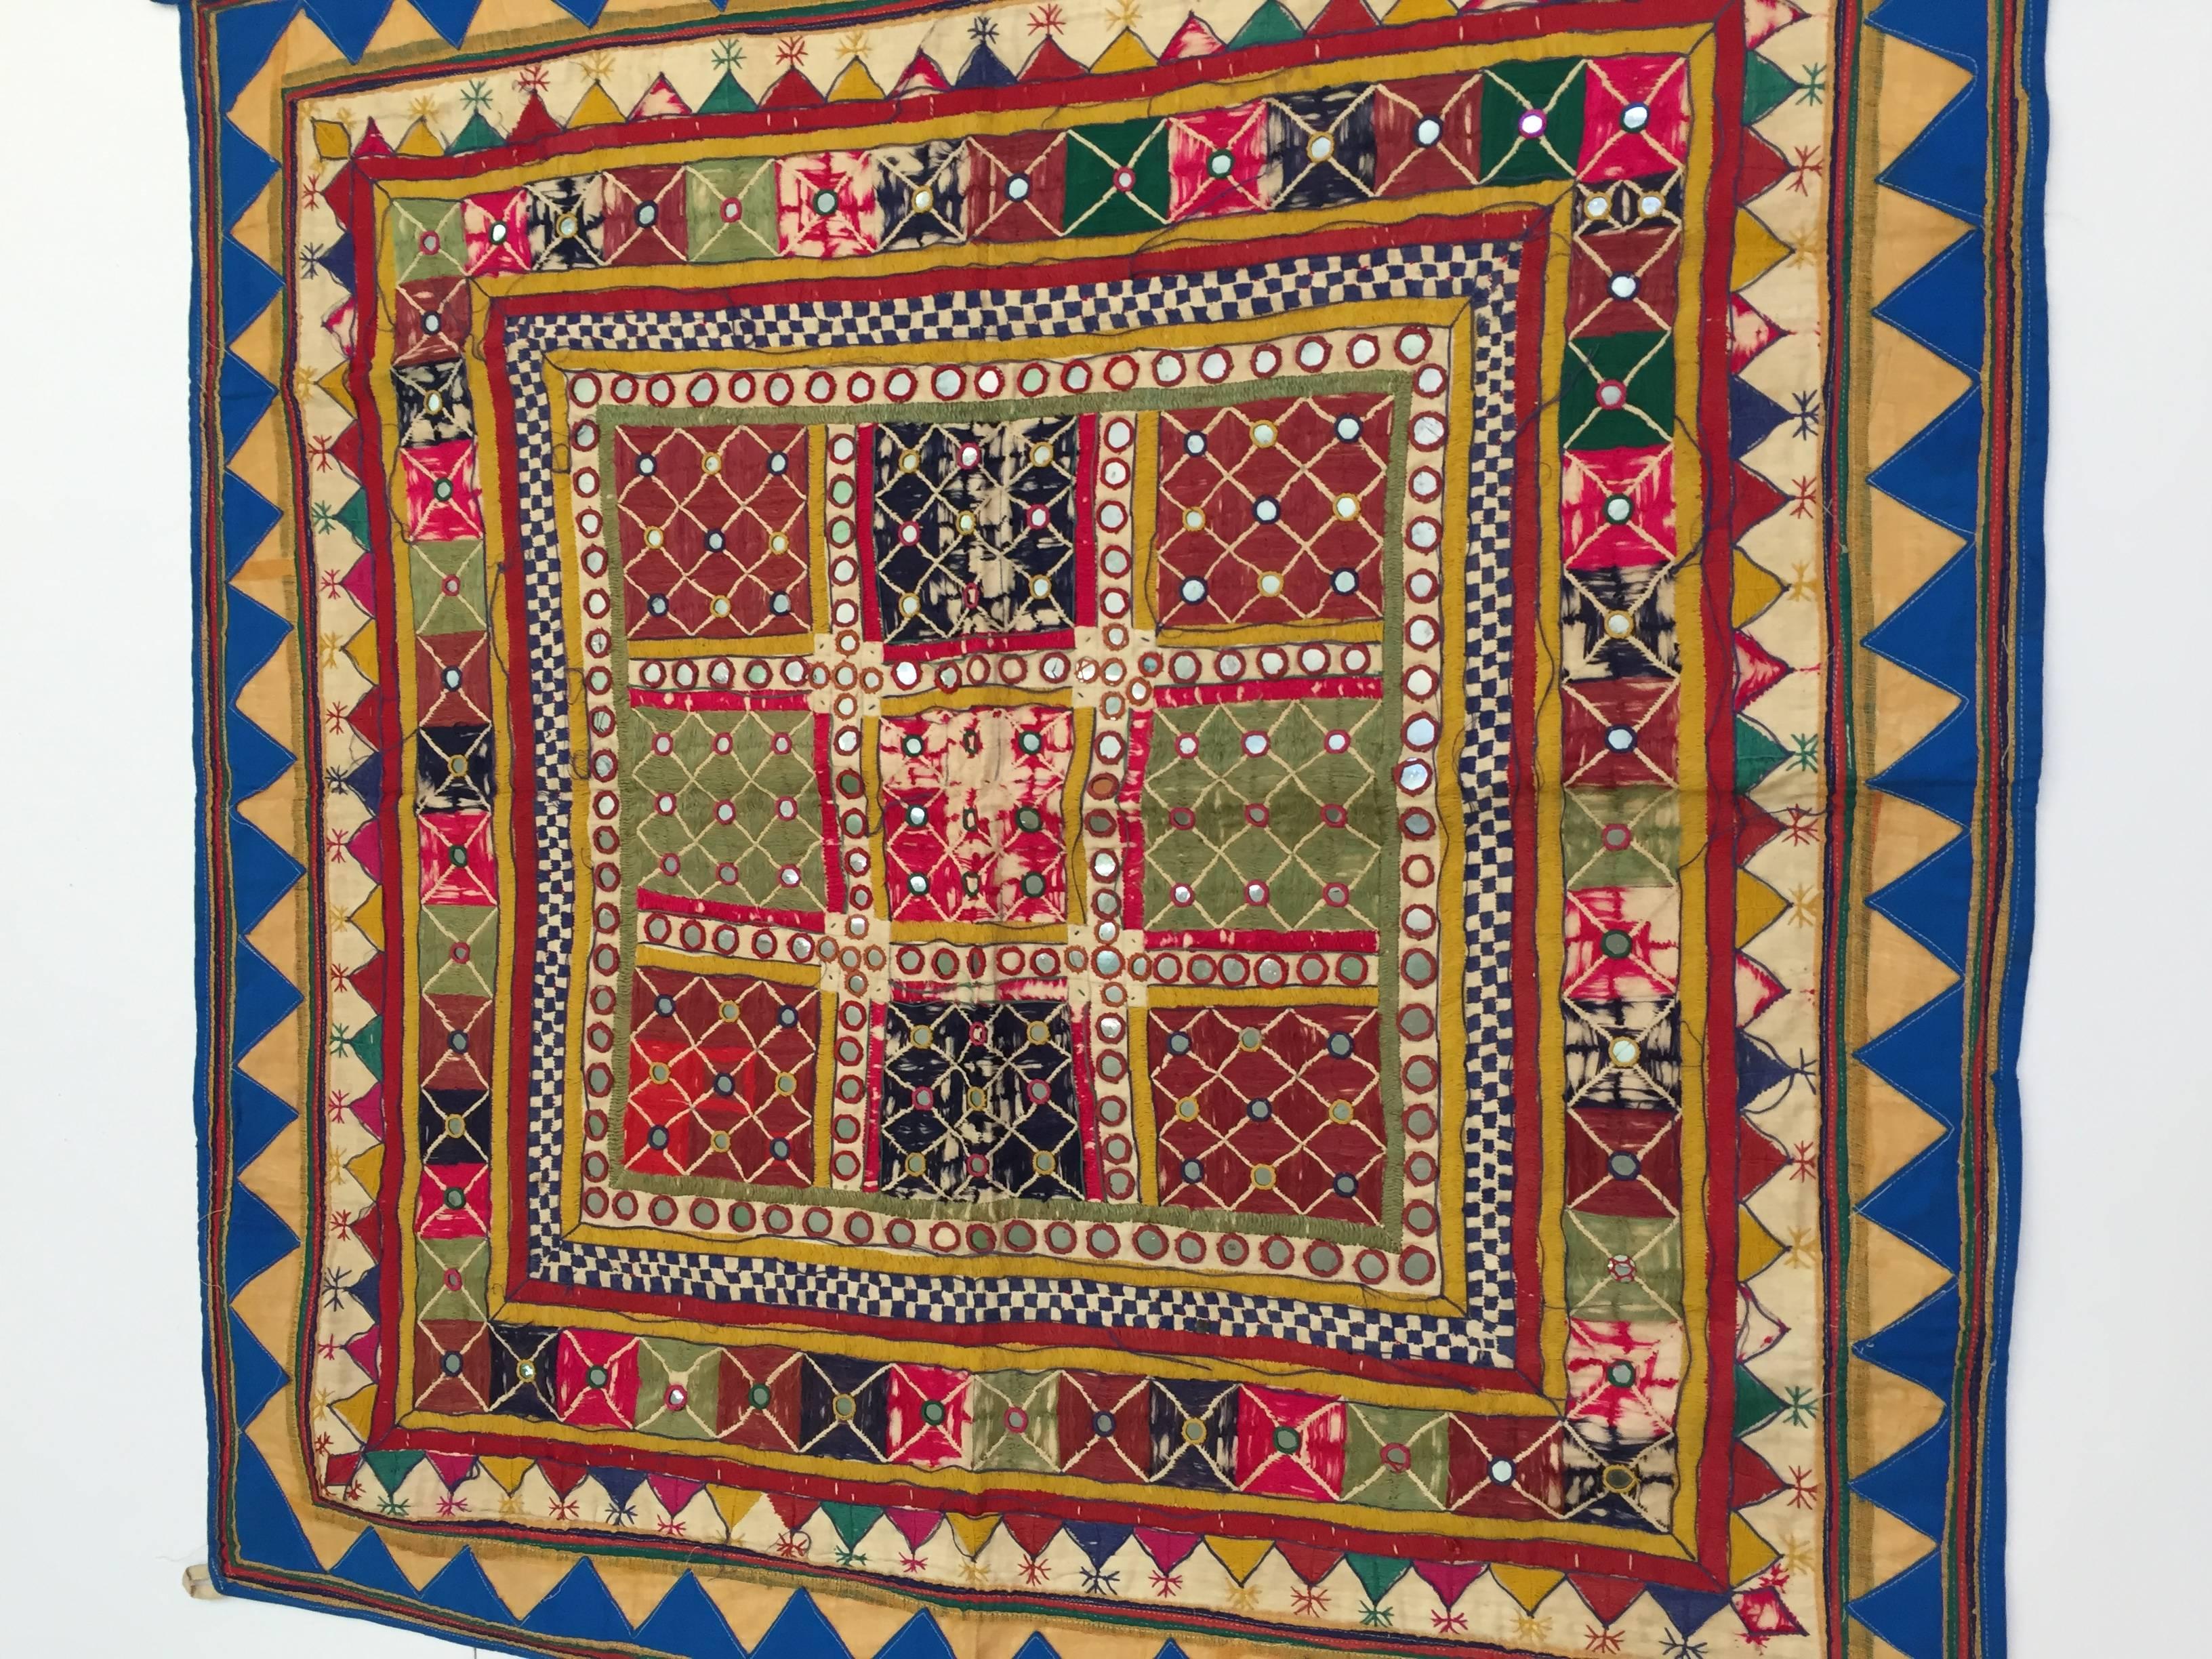 Embroidered ceremonial cloth, square hanging textile.
By the Mahajan people, Kathiavad, Saurashtra.
The embroidery is worked with geometric stitch on linen in red, gold, green, orange, blue, and decorated with mirrors and used for wedding